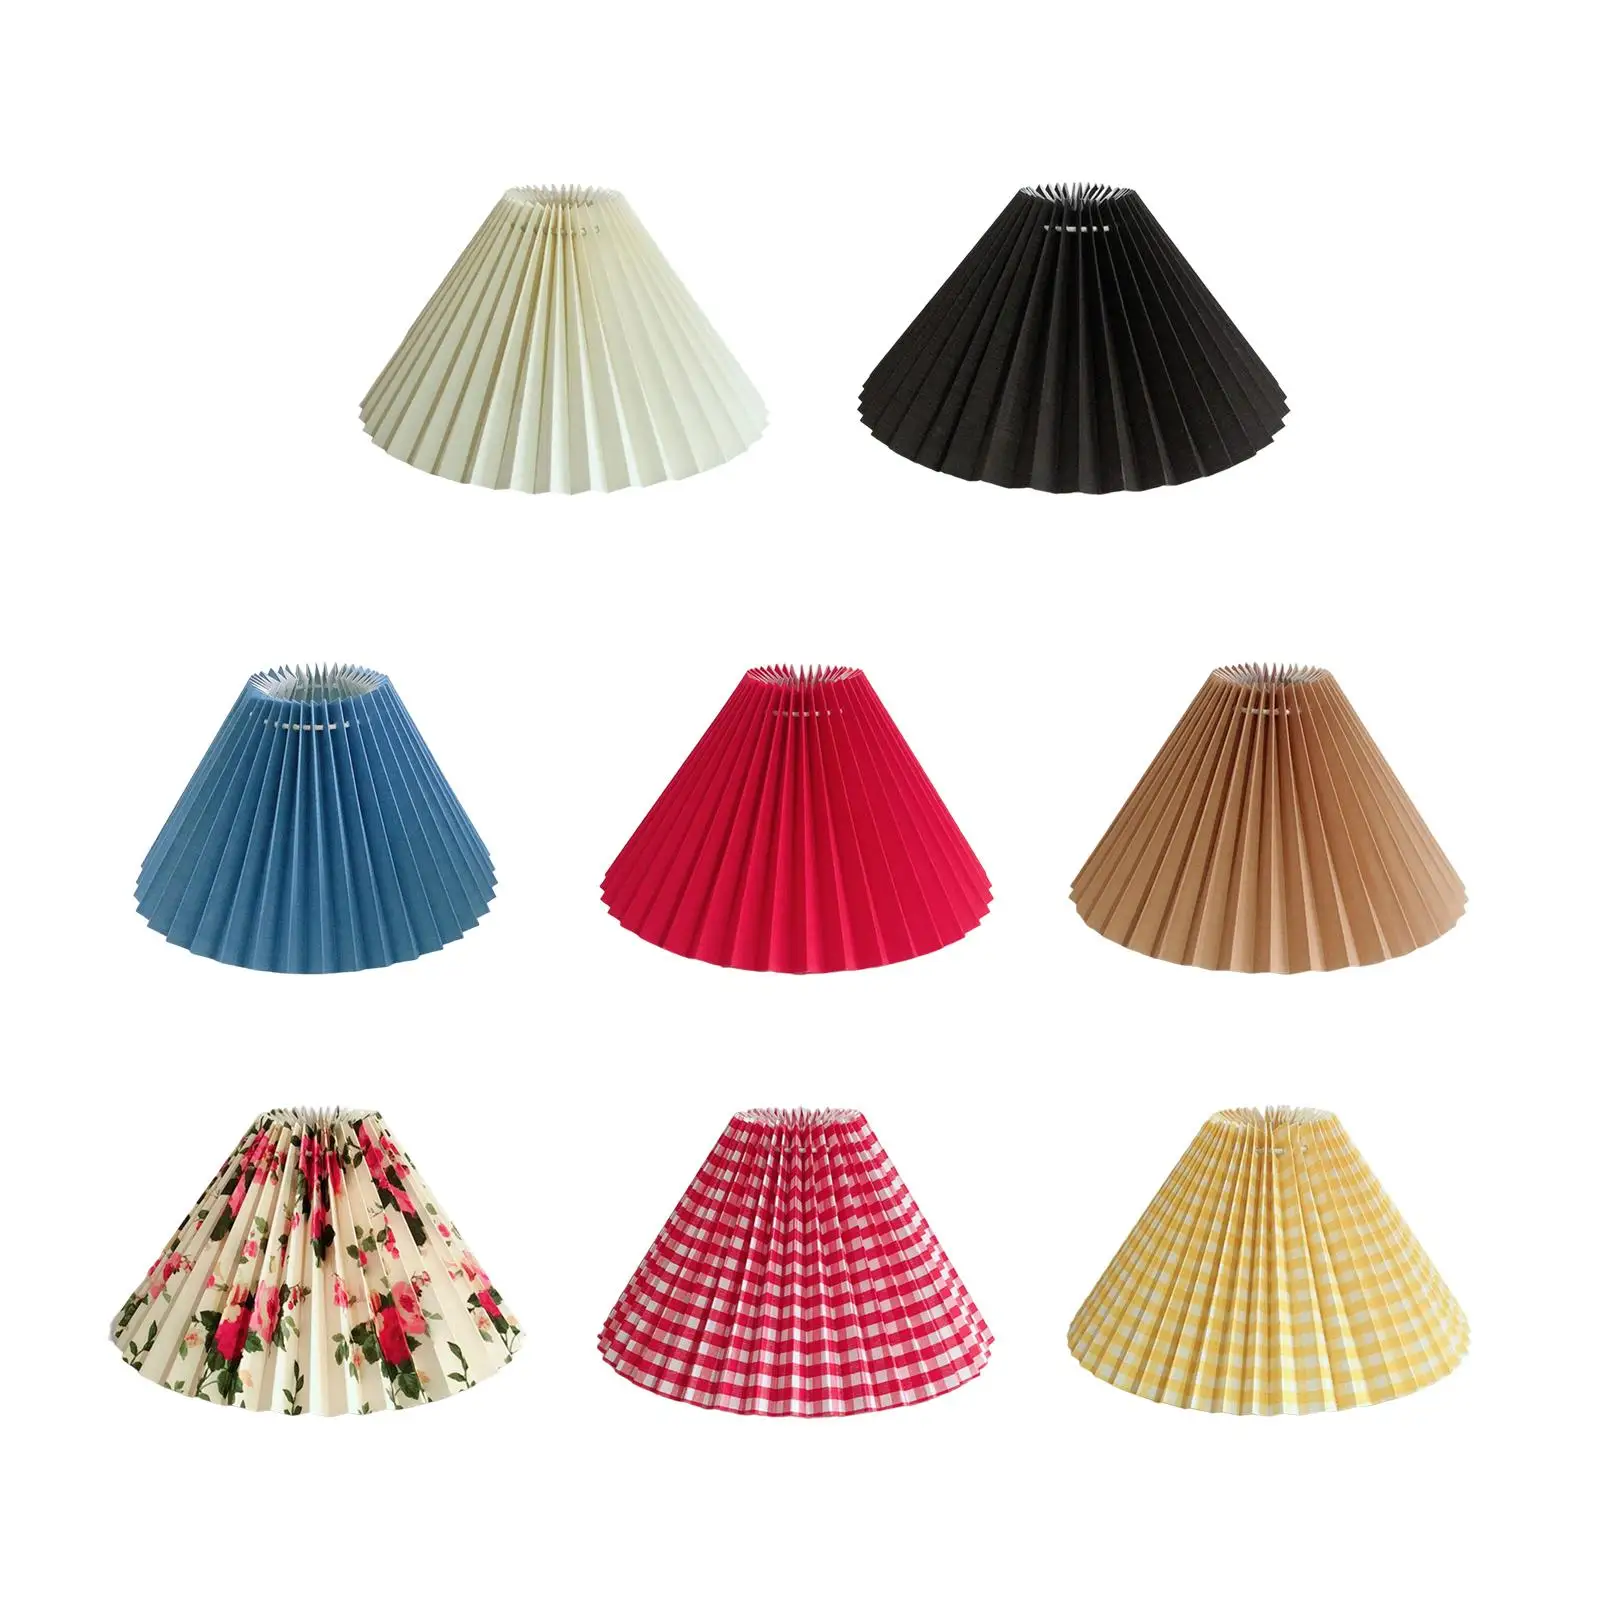 Modern Pleated Lampshade Cloth Bedroom Floor Lamp Table Replacement Hotel